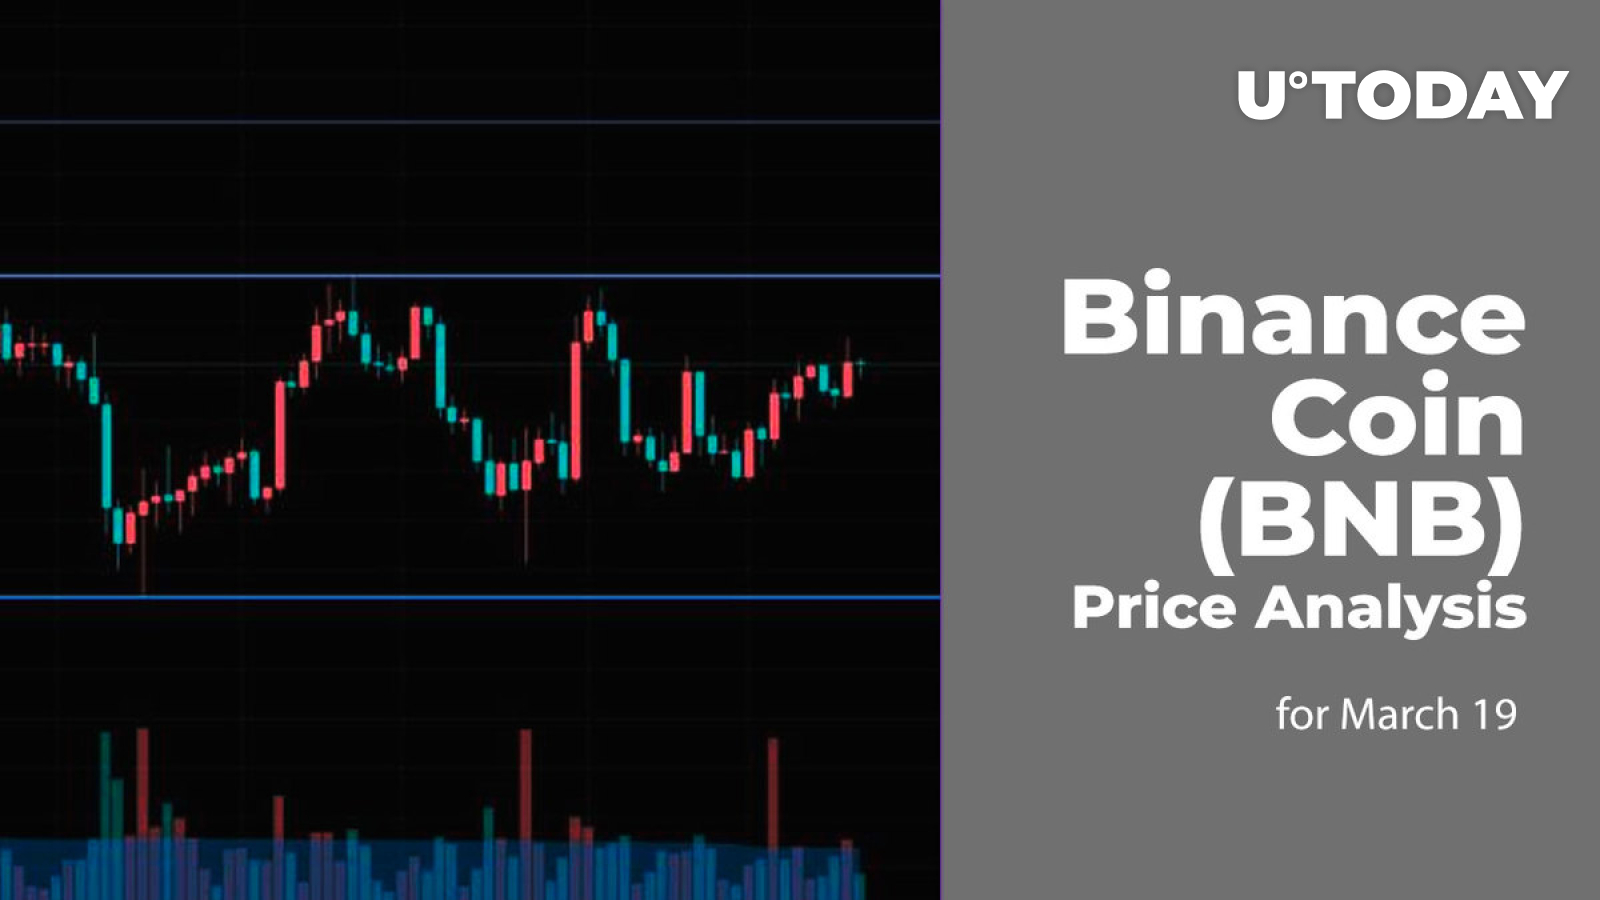 Binance Coin (BNB) Price Analysis for March 19